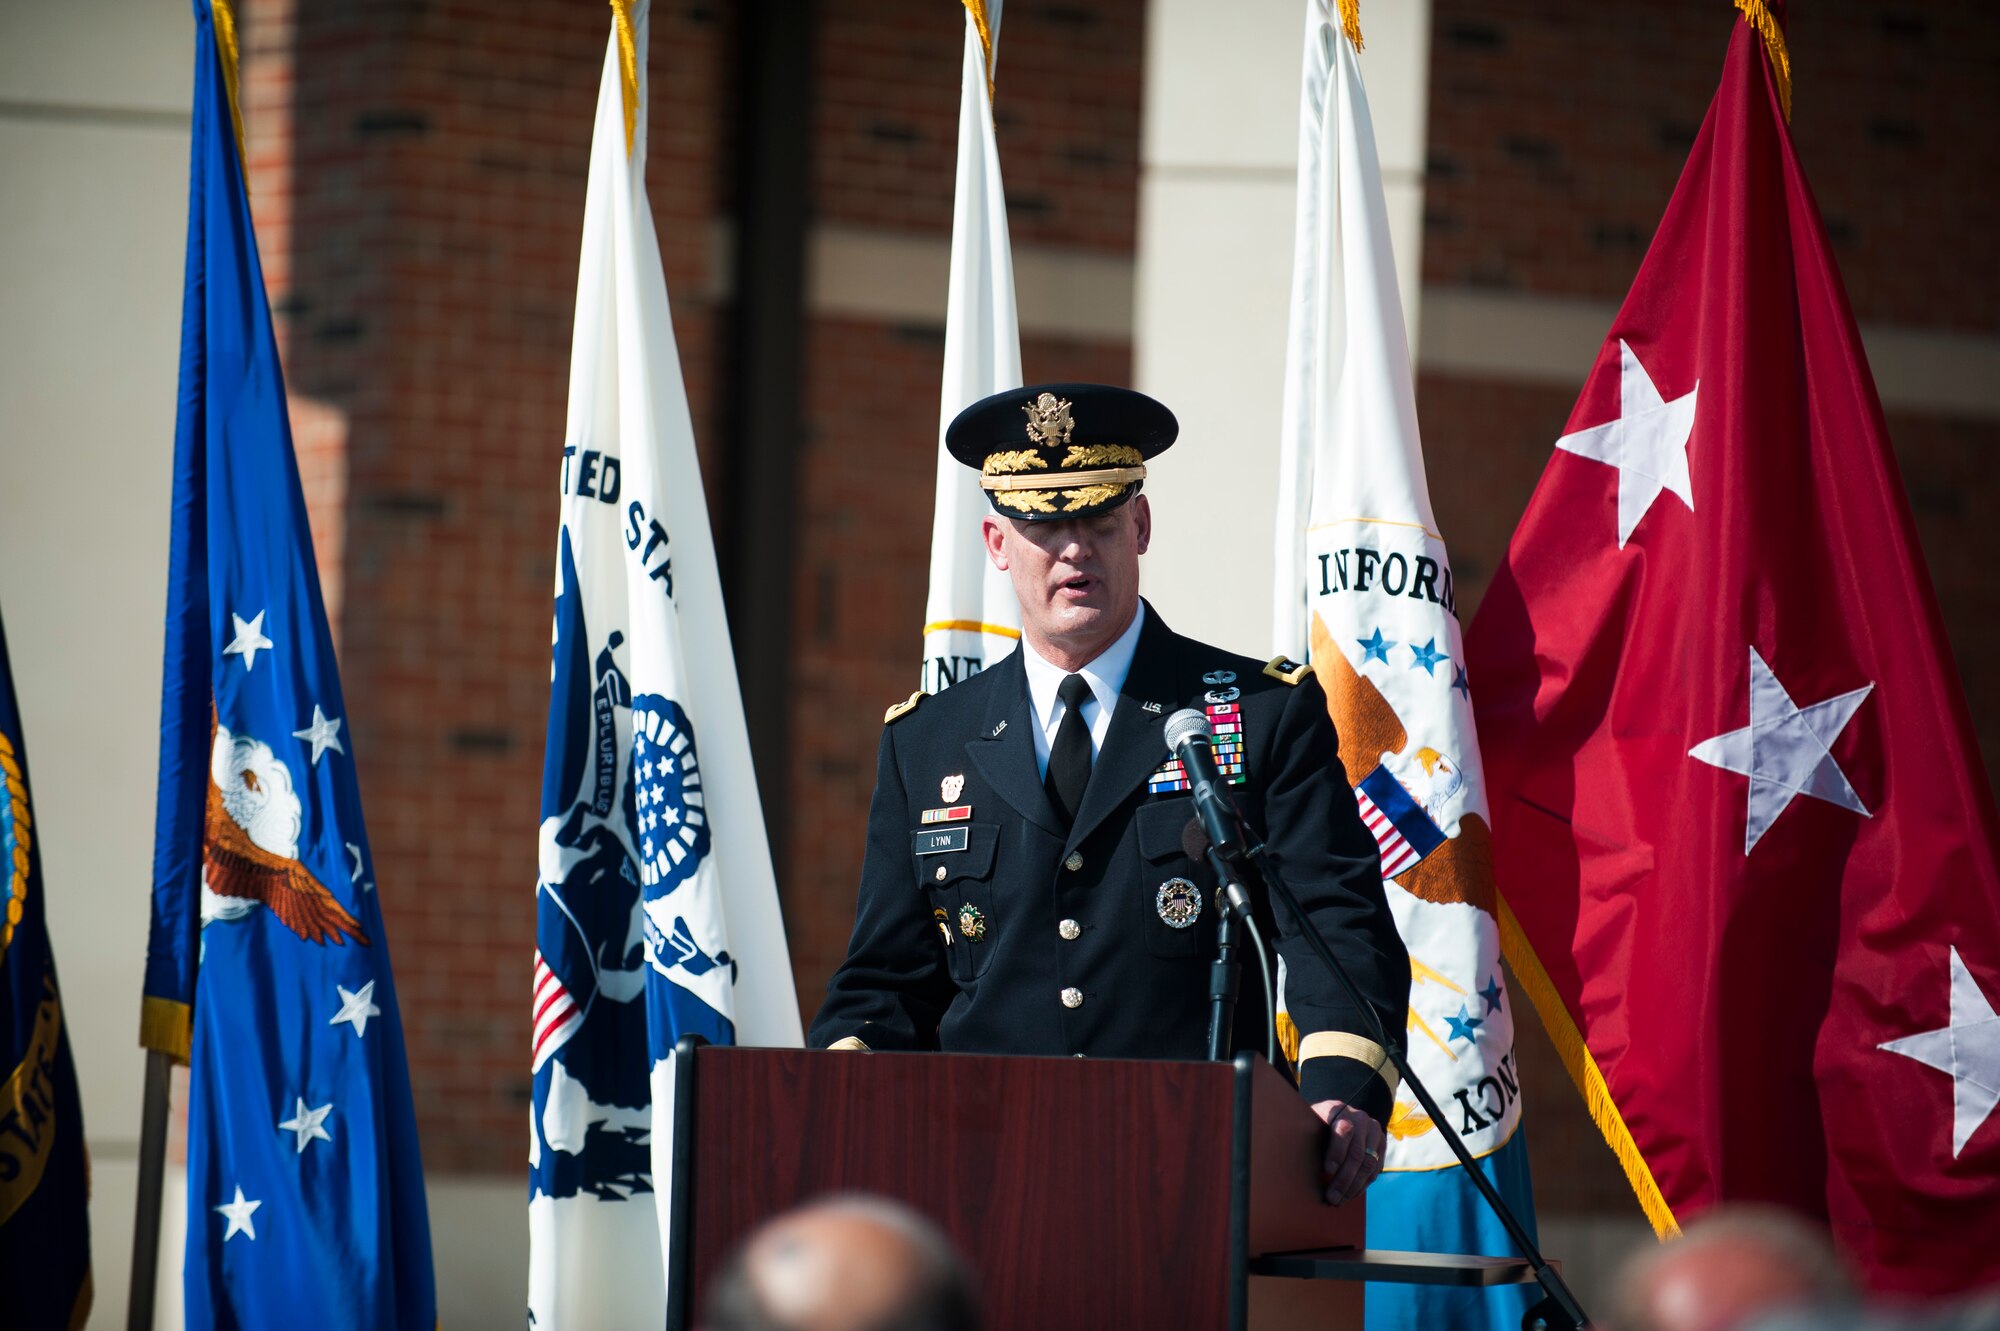 U.S. Army Lt. Gen Alan Lynn, Defense Information Systems Agency director, delivers a speech during a ribbon cutting ceremony for the new DISA compound at Scott Air Force Base, Ill., Aug. 11, 2016. The $100 million facility was completed on time and under budget. (U.S. Air Force photo by Staff Sgt. Clayton Lenhardt/Released)